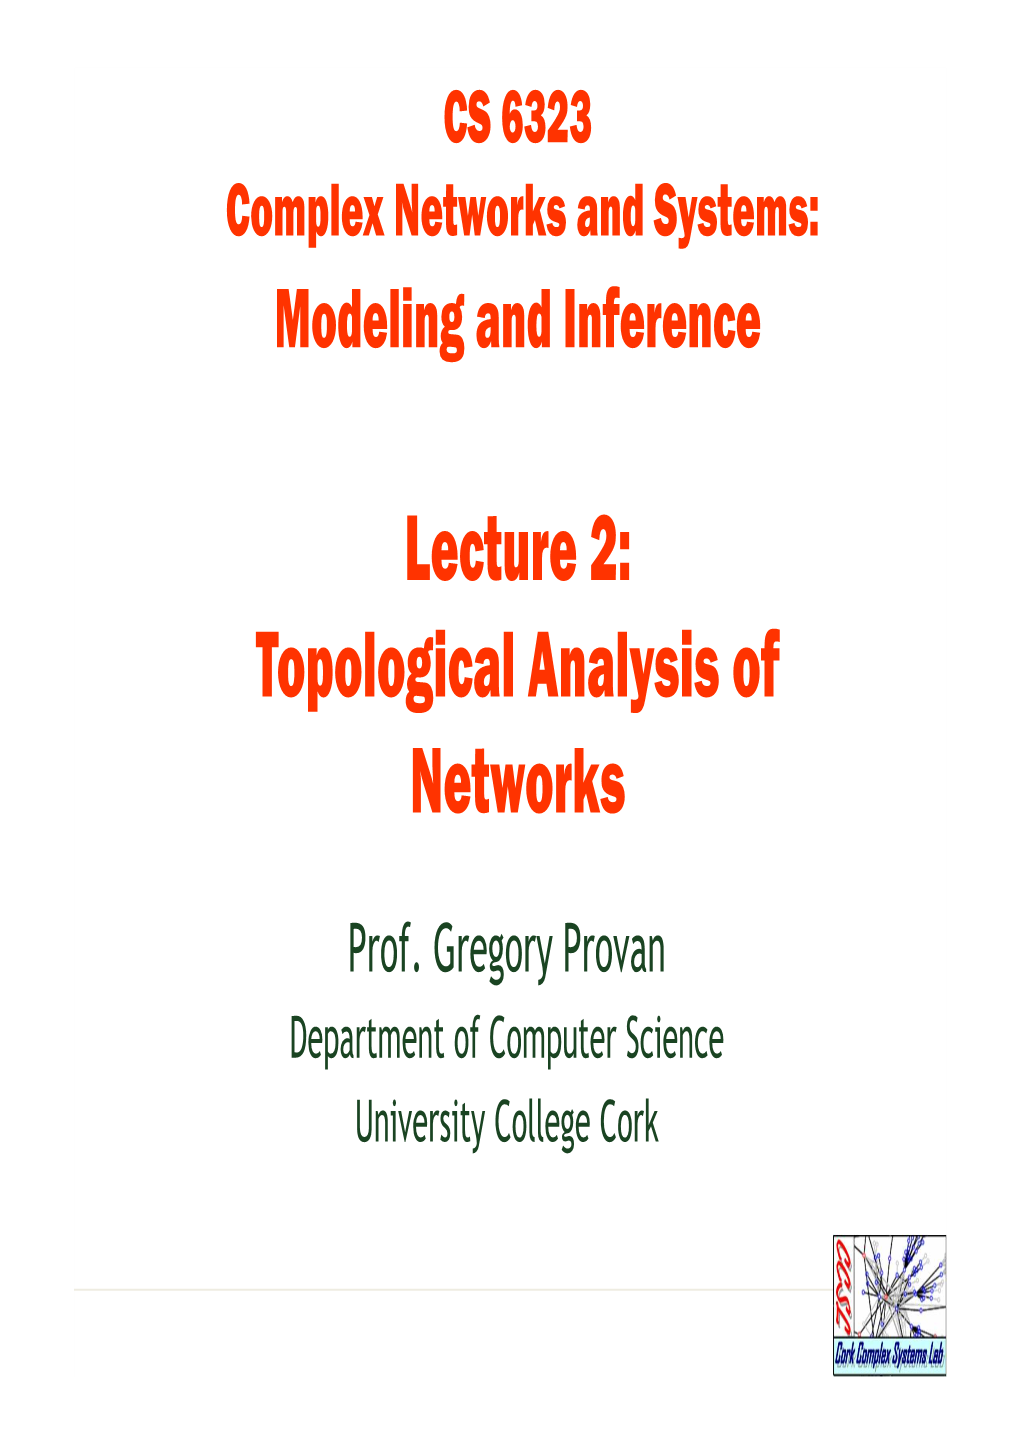 Topological Analysis of Networks